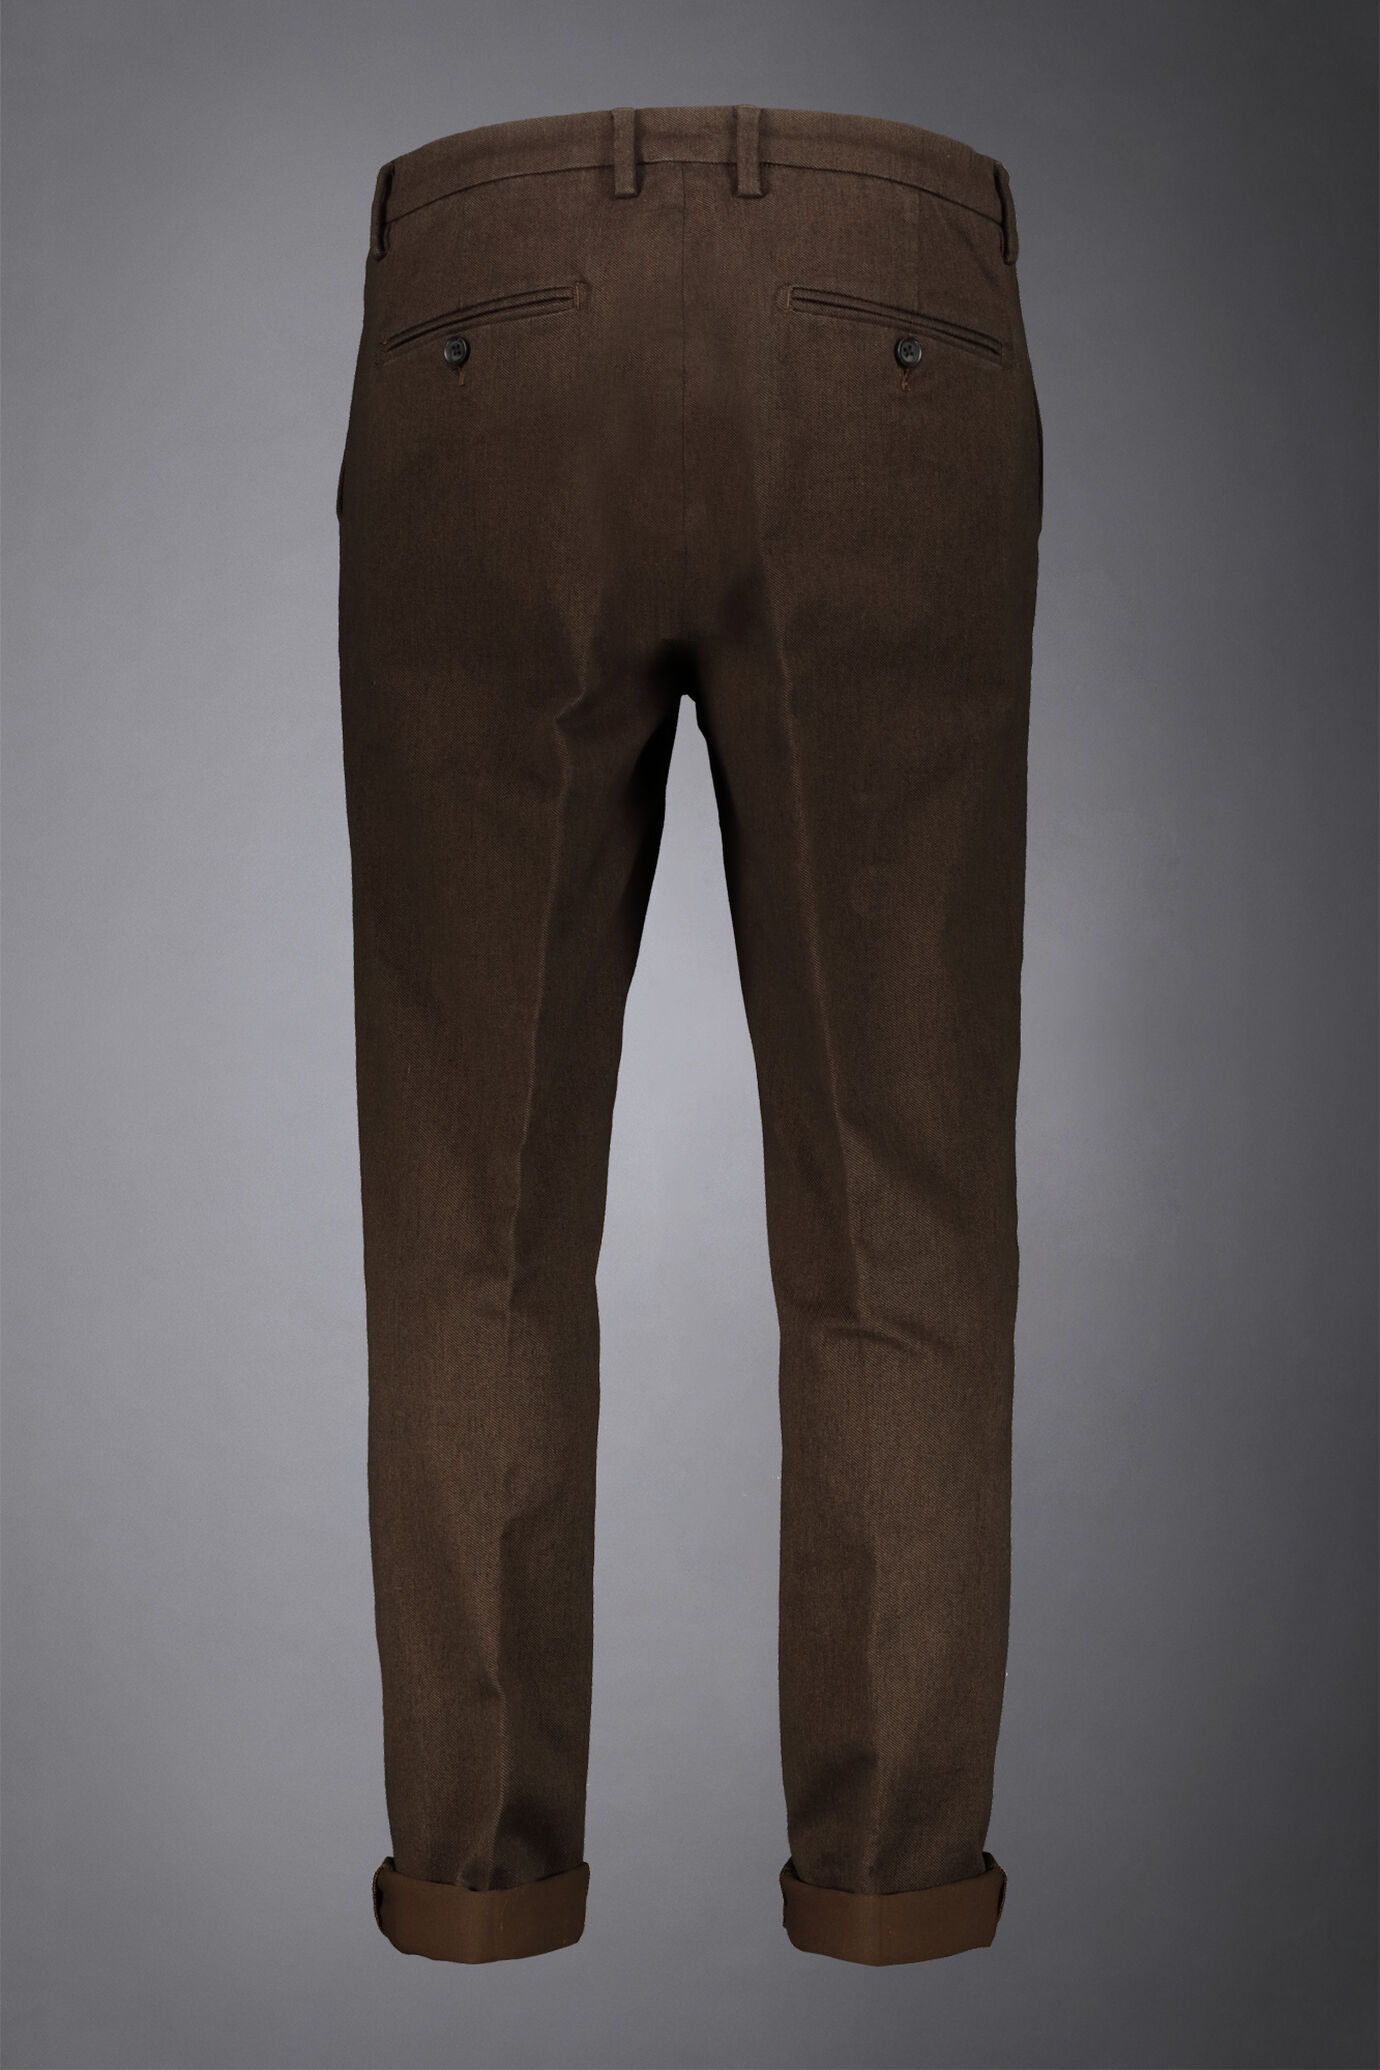 Men's chino pants cotton fabric hand wool cavalry twill image number 5